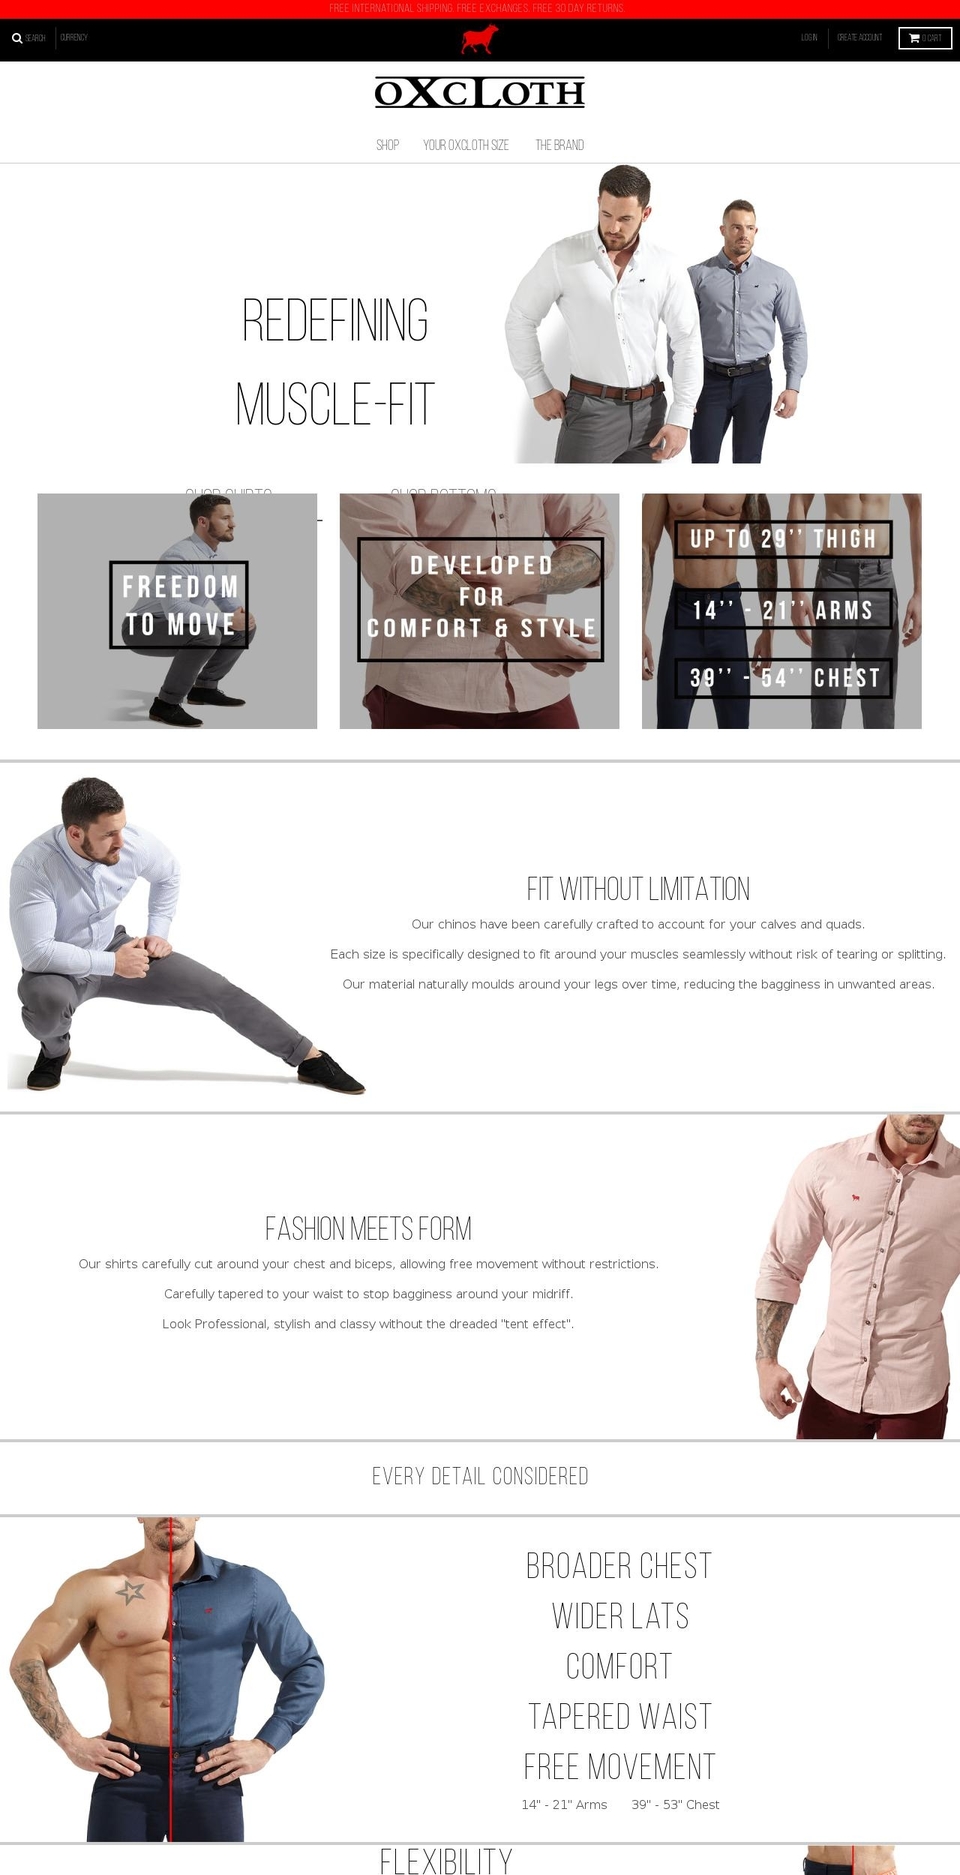 Reformation Shopify theme site example oxcloth.com